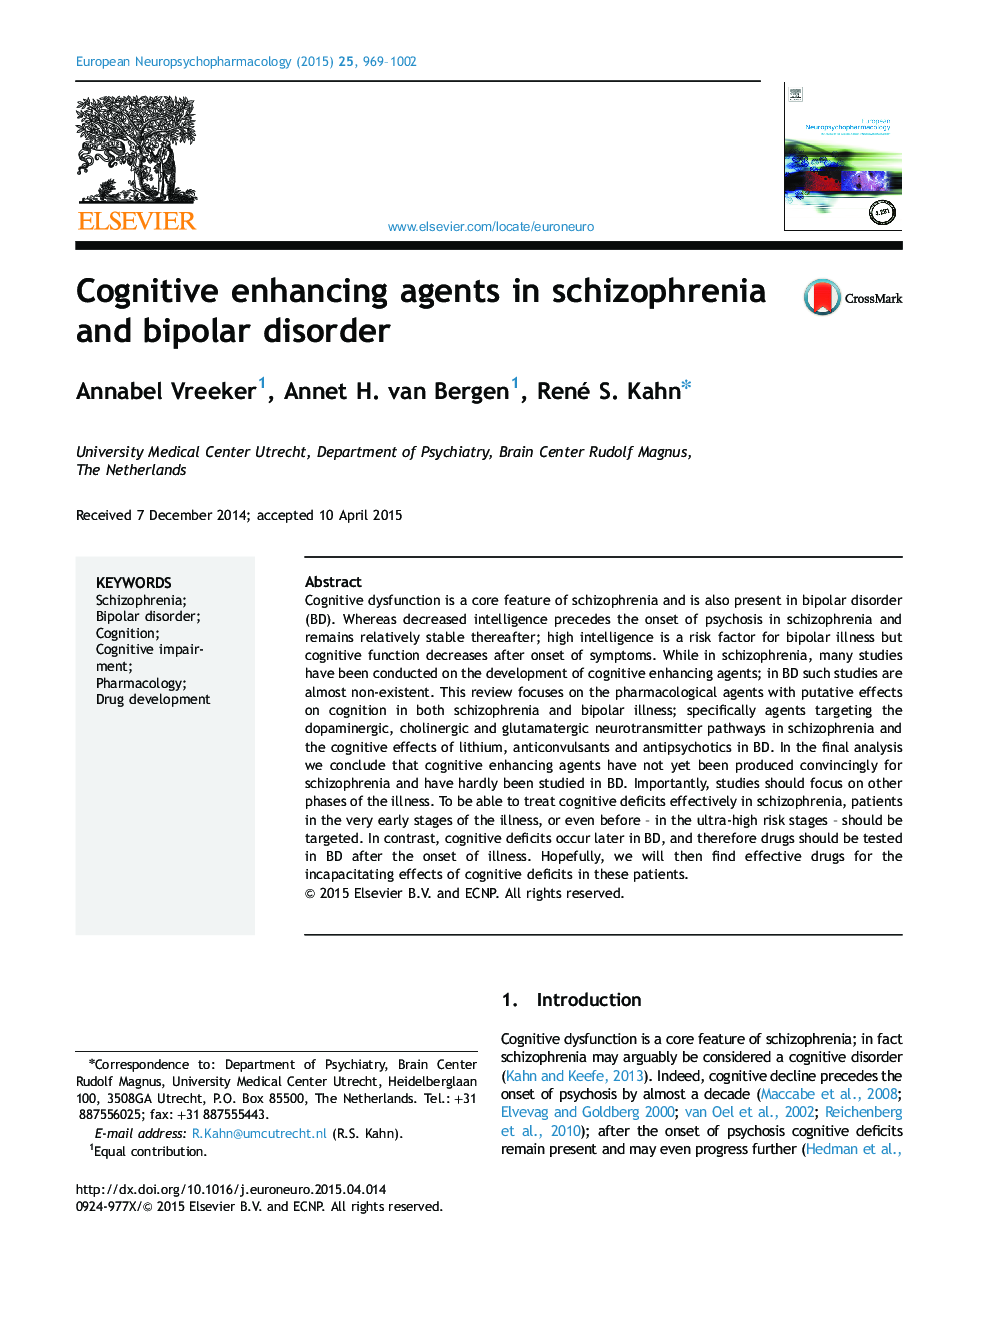 Cognitive enhancing agents in schizophrenia and bipolar disorder